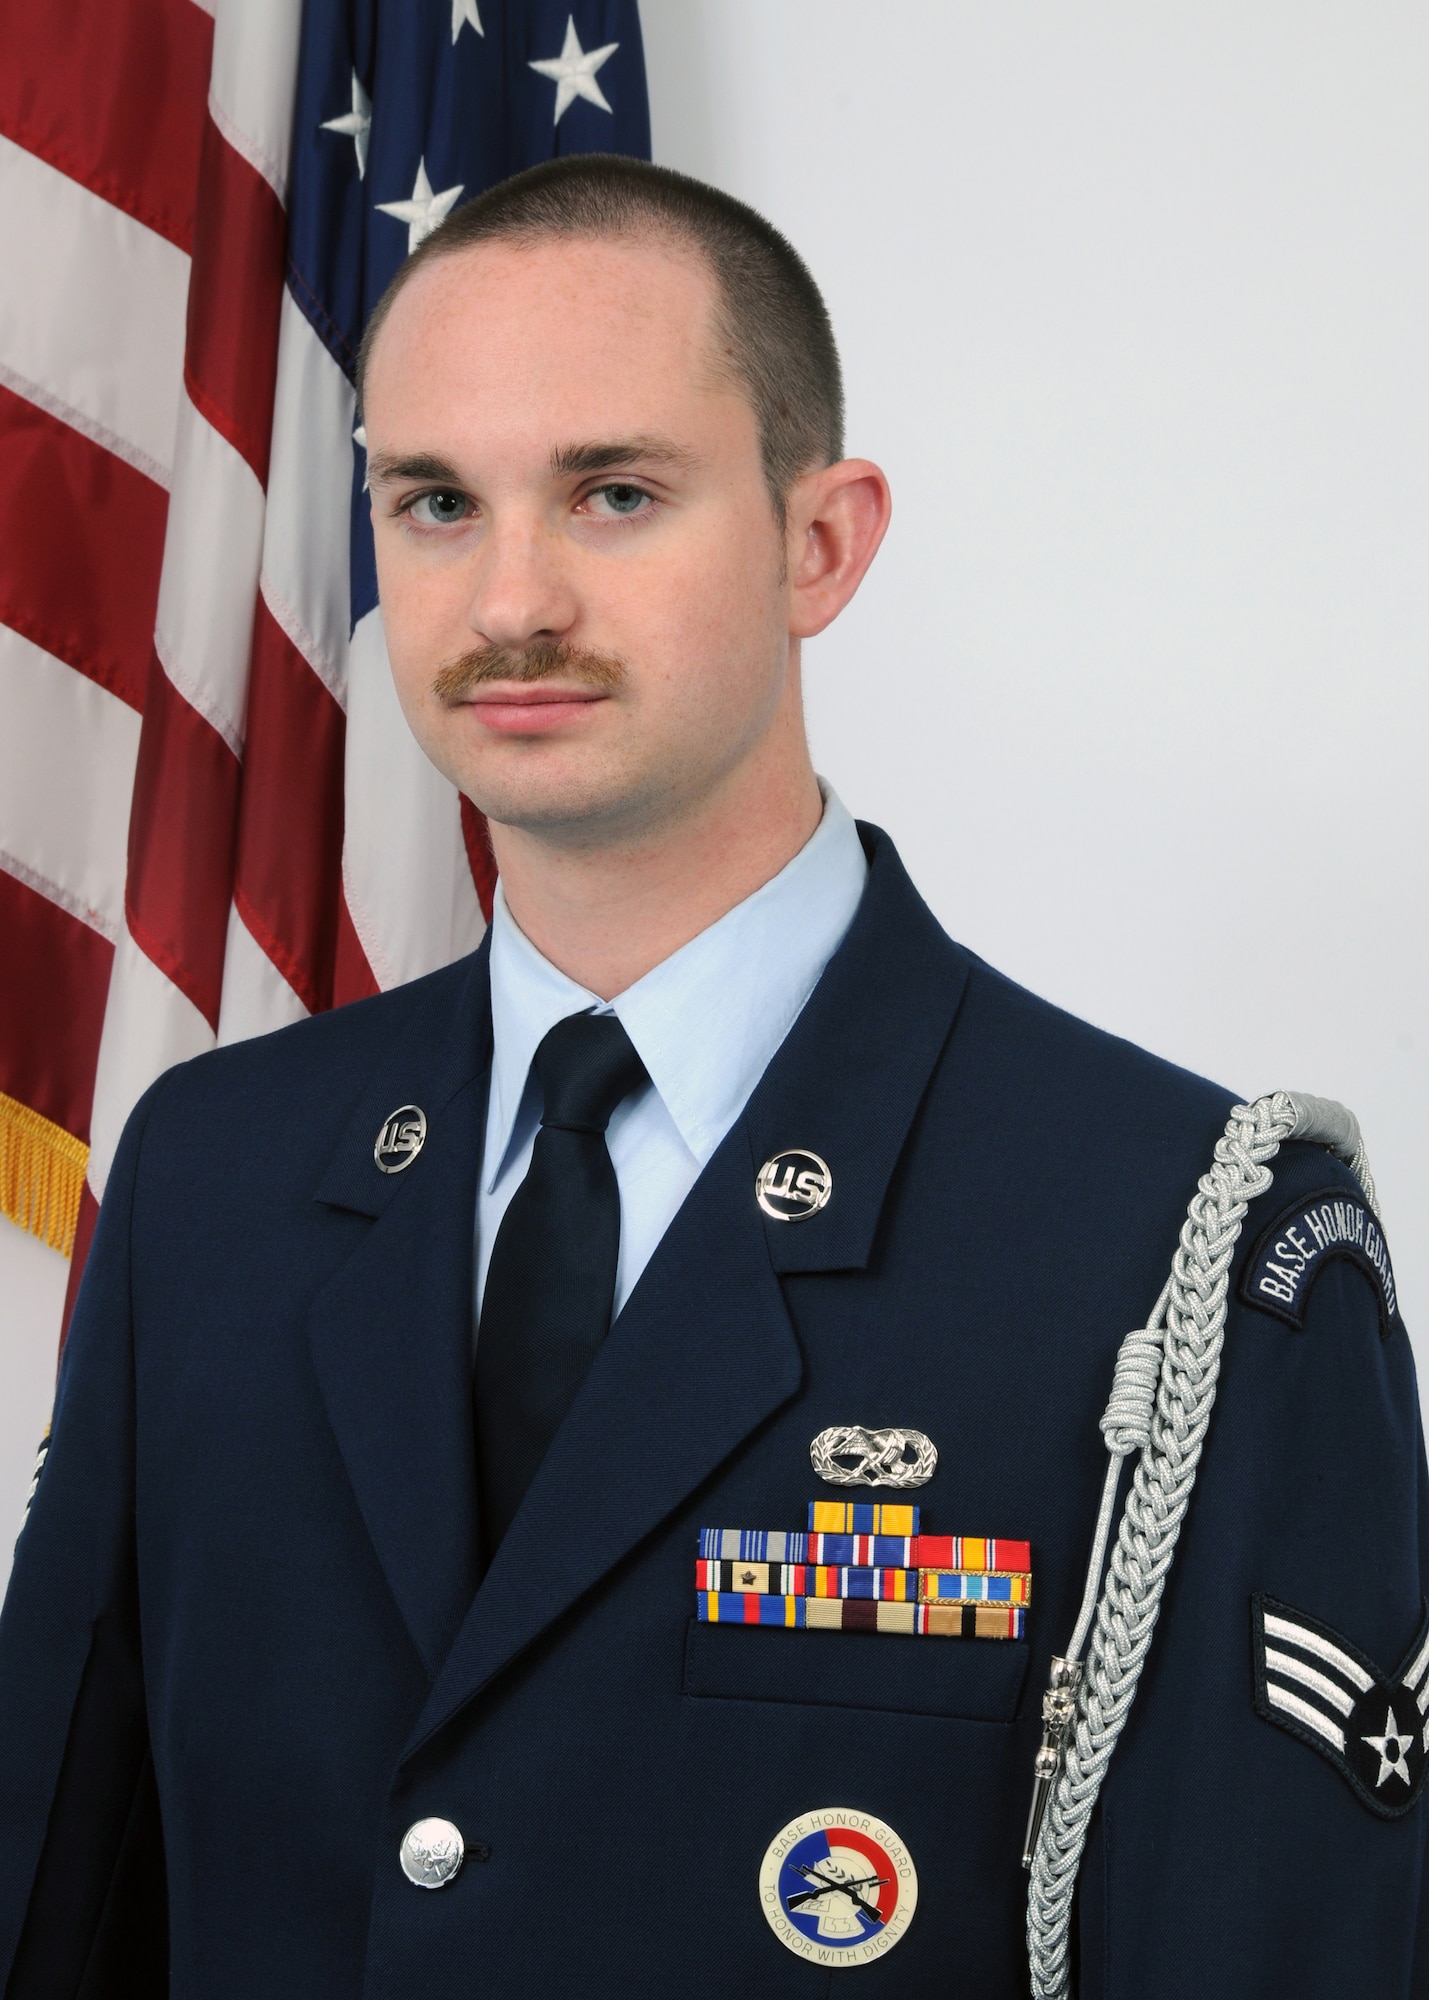 Senior Airman Joel Miller, a member of the 166th Maintenance Squadron, 166th Airlift Wing, New Castle, Del., is the Delaware Air National Guard's FY 2009 Honor Guard Member of the Year. Airman Miller, a resident of Newark, Del., is an aircraft metals technician in the 166th MXS. He deployed with his unit to Bagram Airfield, Afghanistan from Dec. 2009 to Jan. 2010 in support of Operation Enduring Freedom. Airman Miller is a member of the Delaware ANG Honor Guard, performing numerous ceremonies throughout the state. (U.S. Air Force photo/Senior Master Sgt. Gerald Dougherty, Delaware ANG)